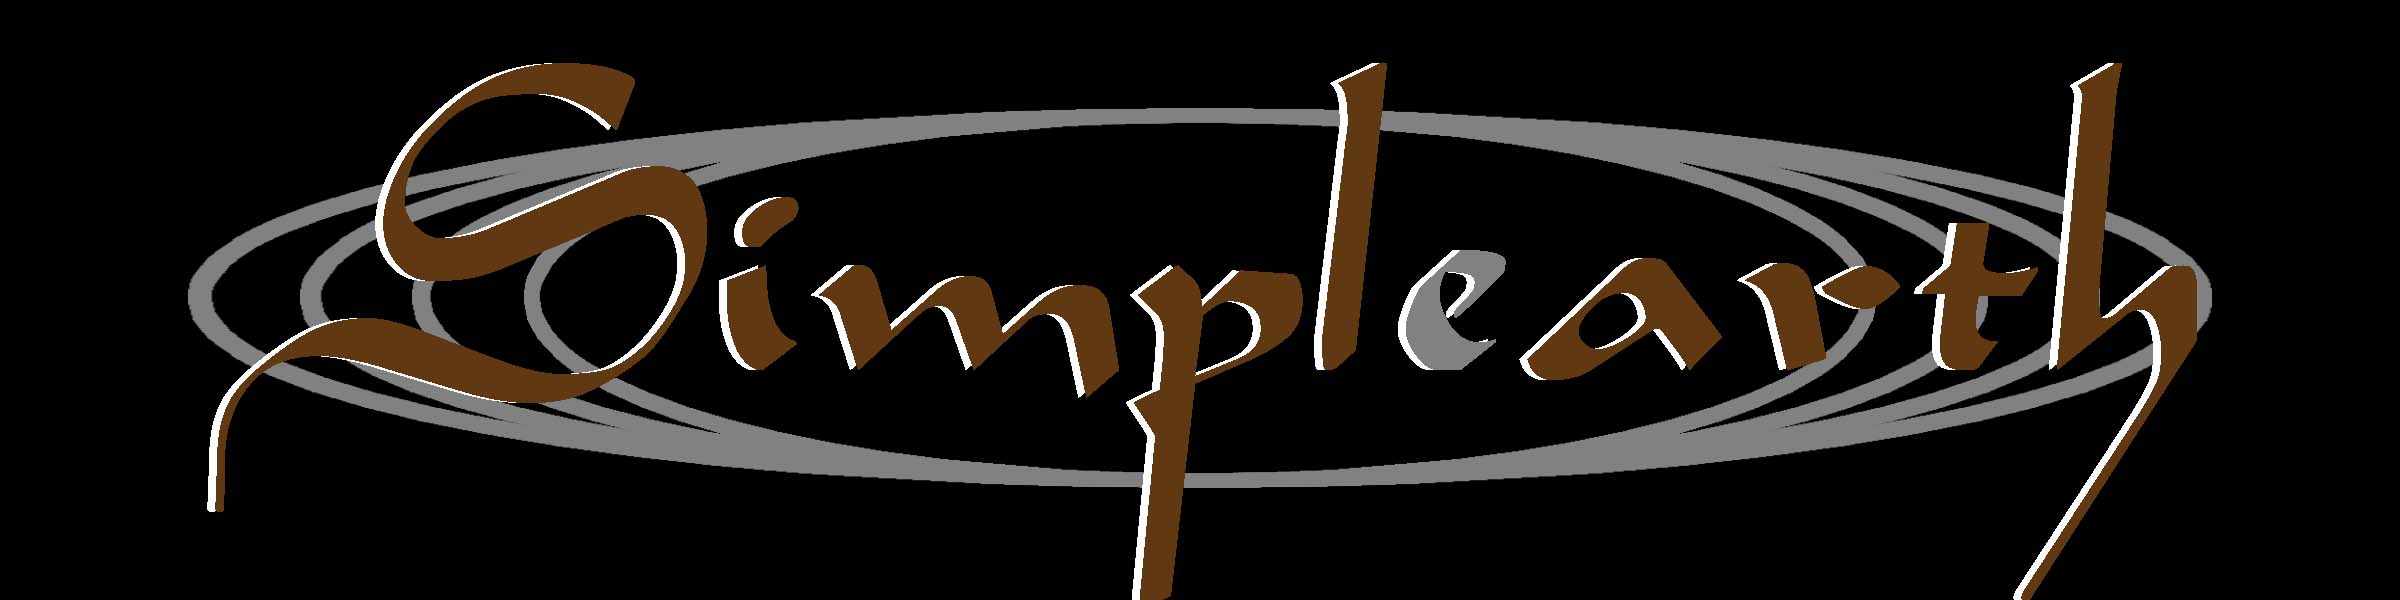 Simplearth's logo